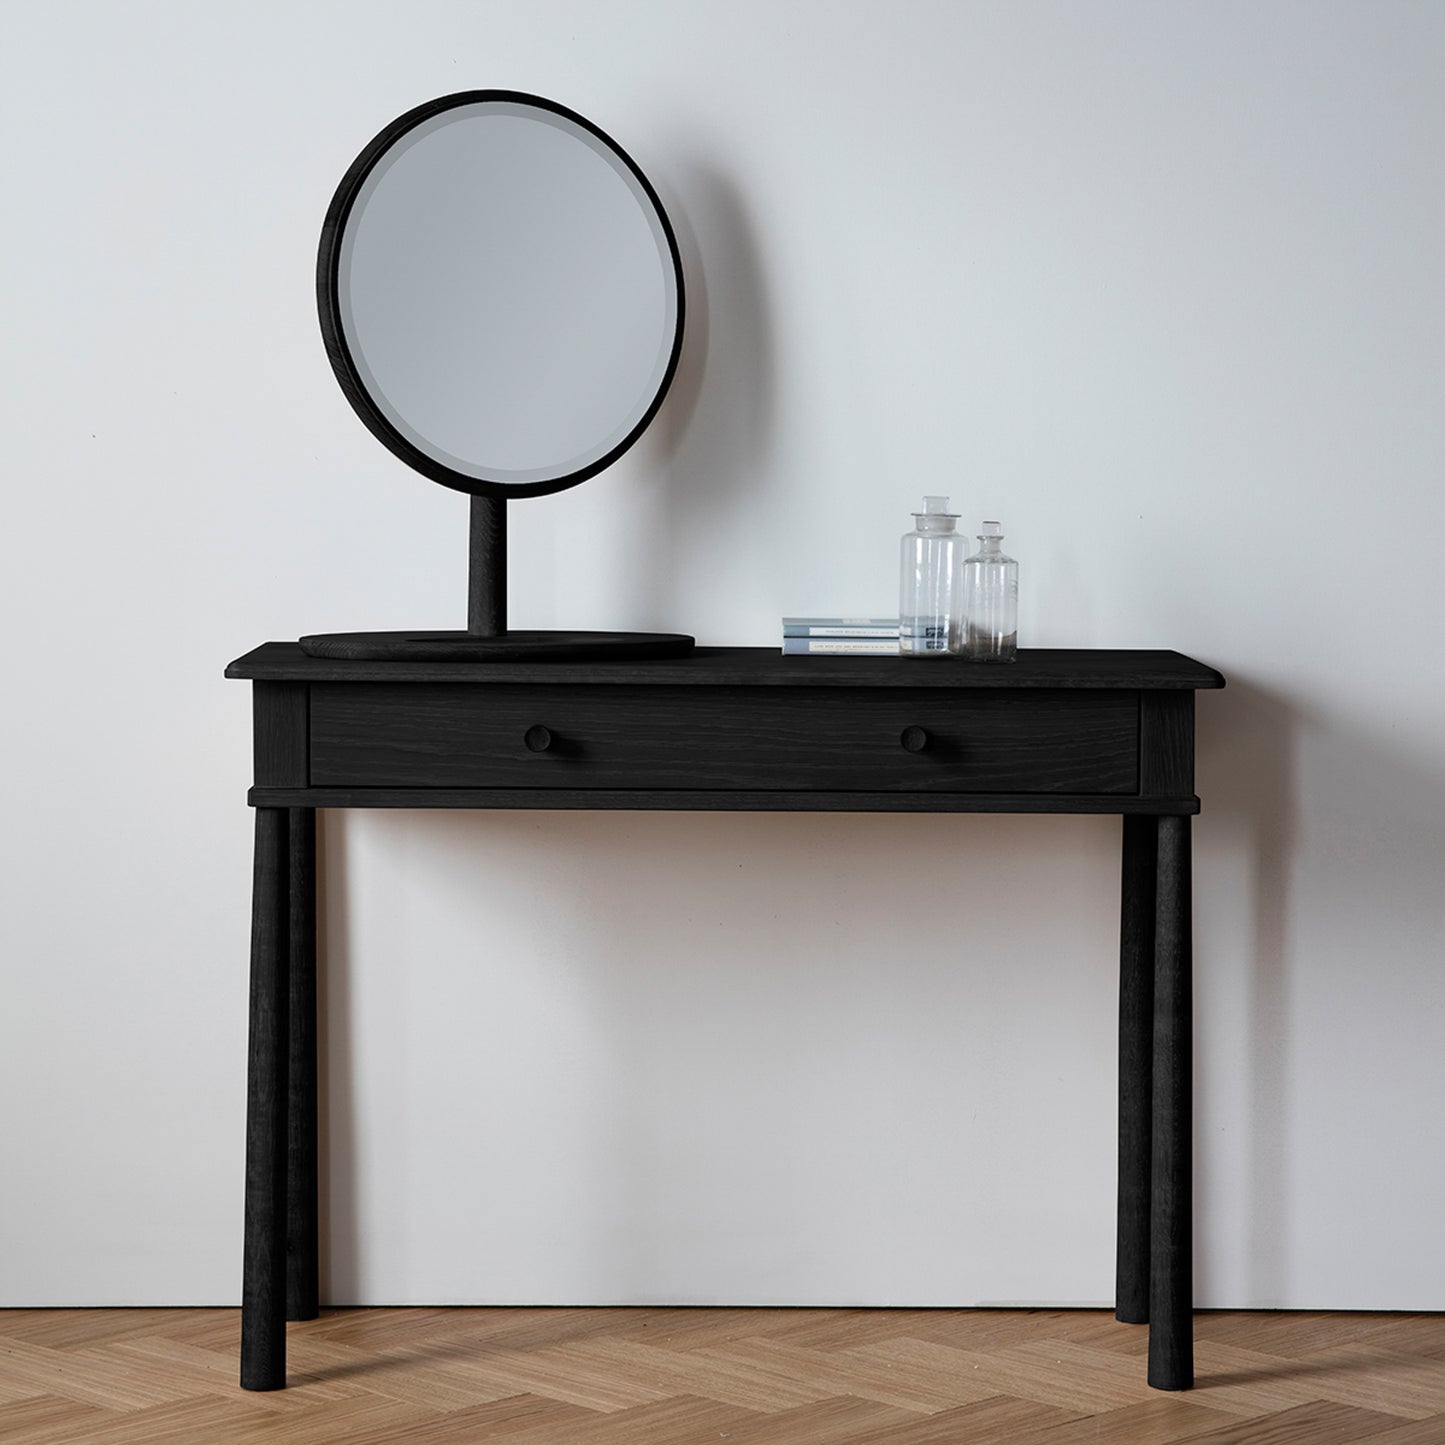 A Tigley Dressing Table with a mirror, perfect for home furniture and interior decor.